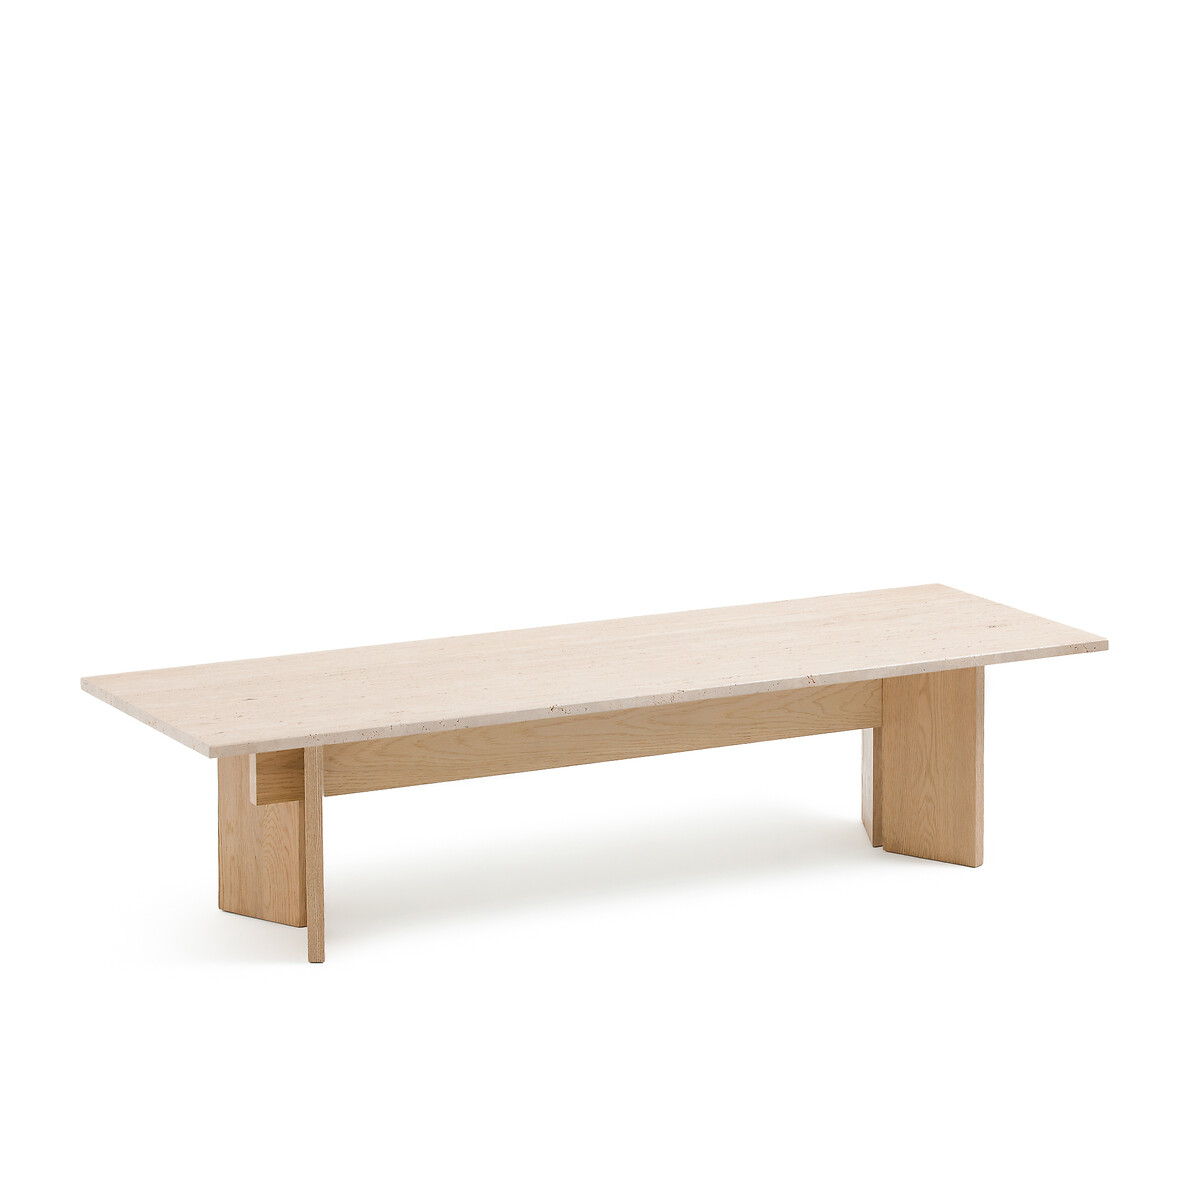 Mindo Bleached Solid Oak Travertine Coffee Table